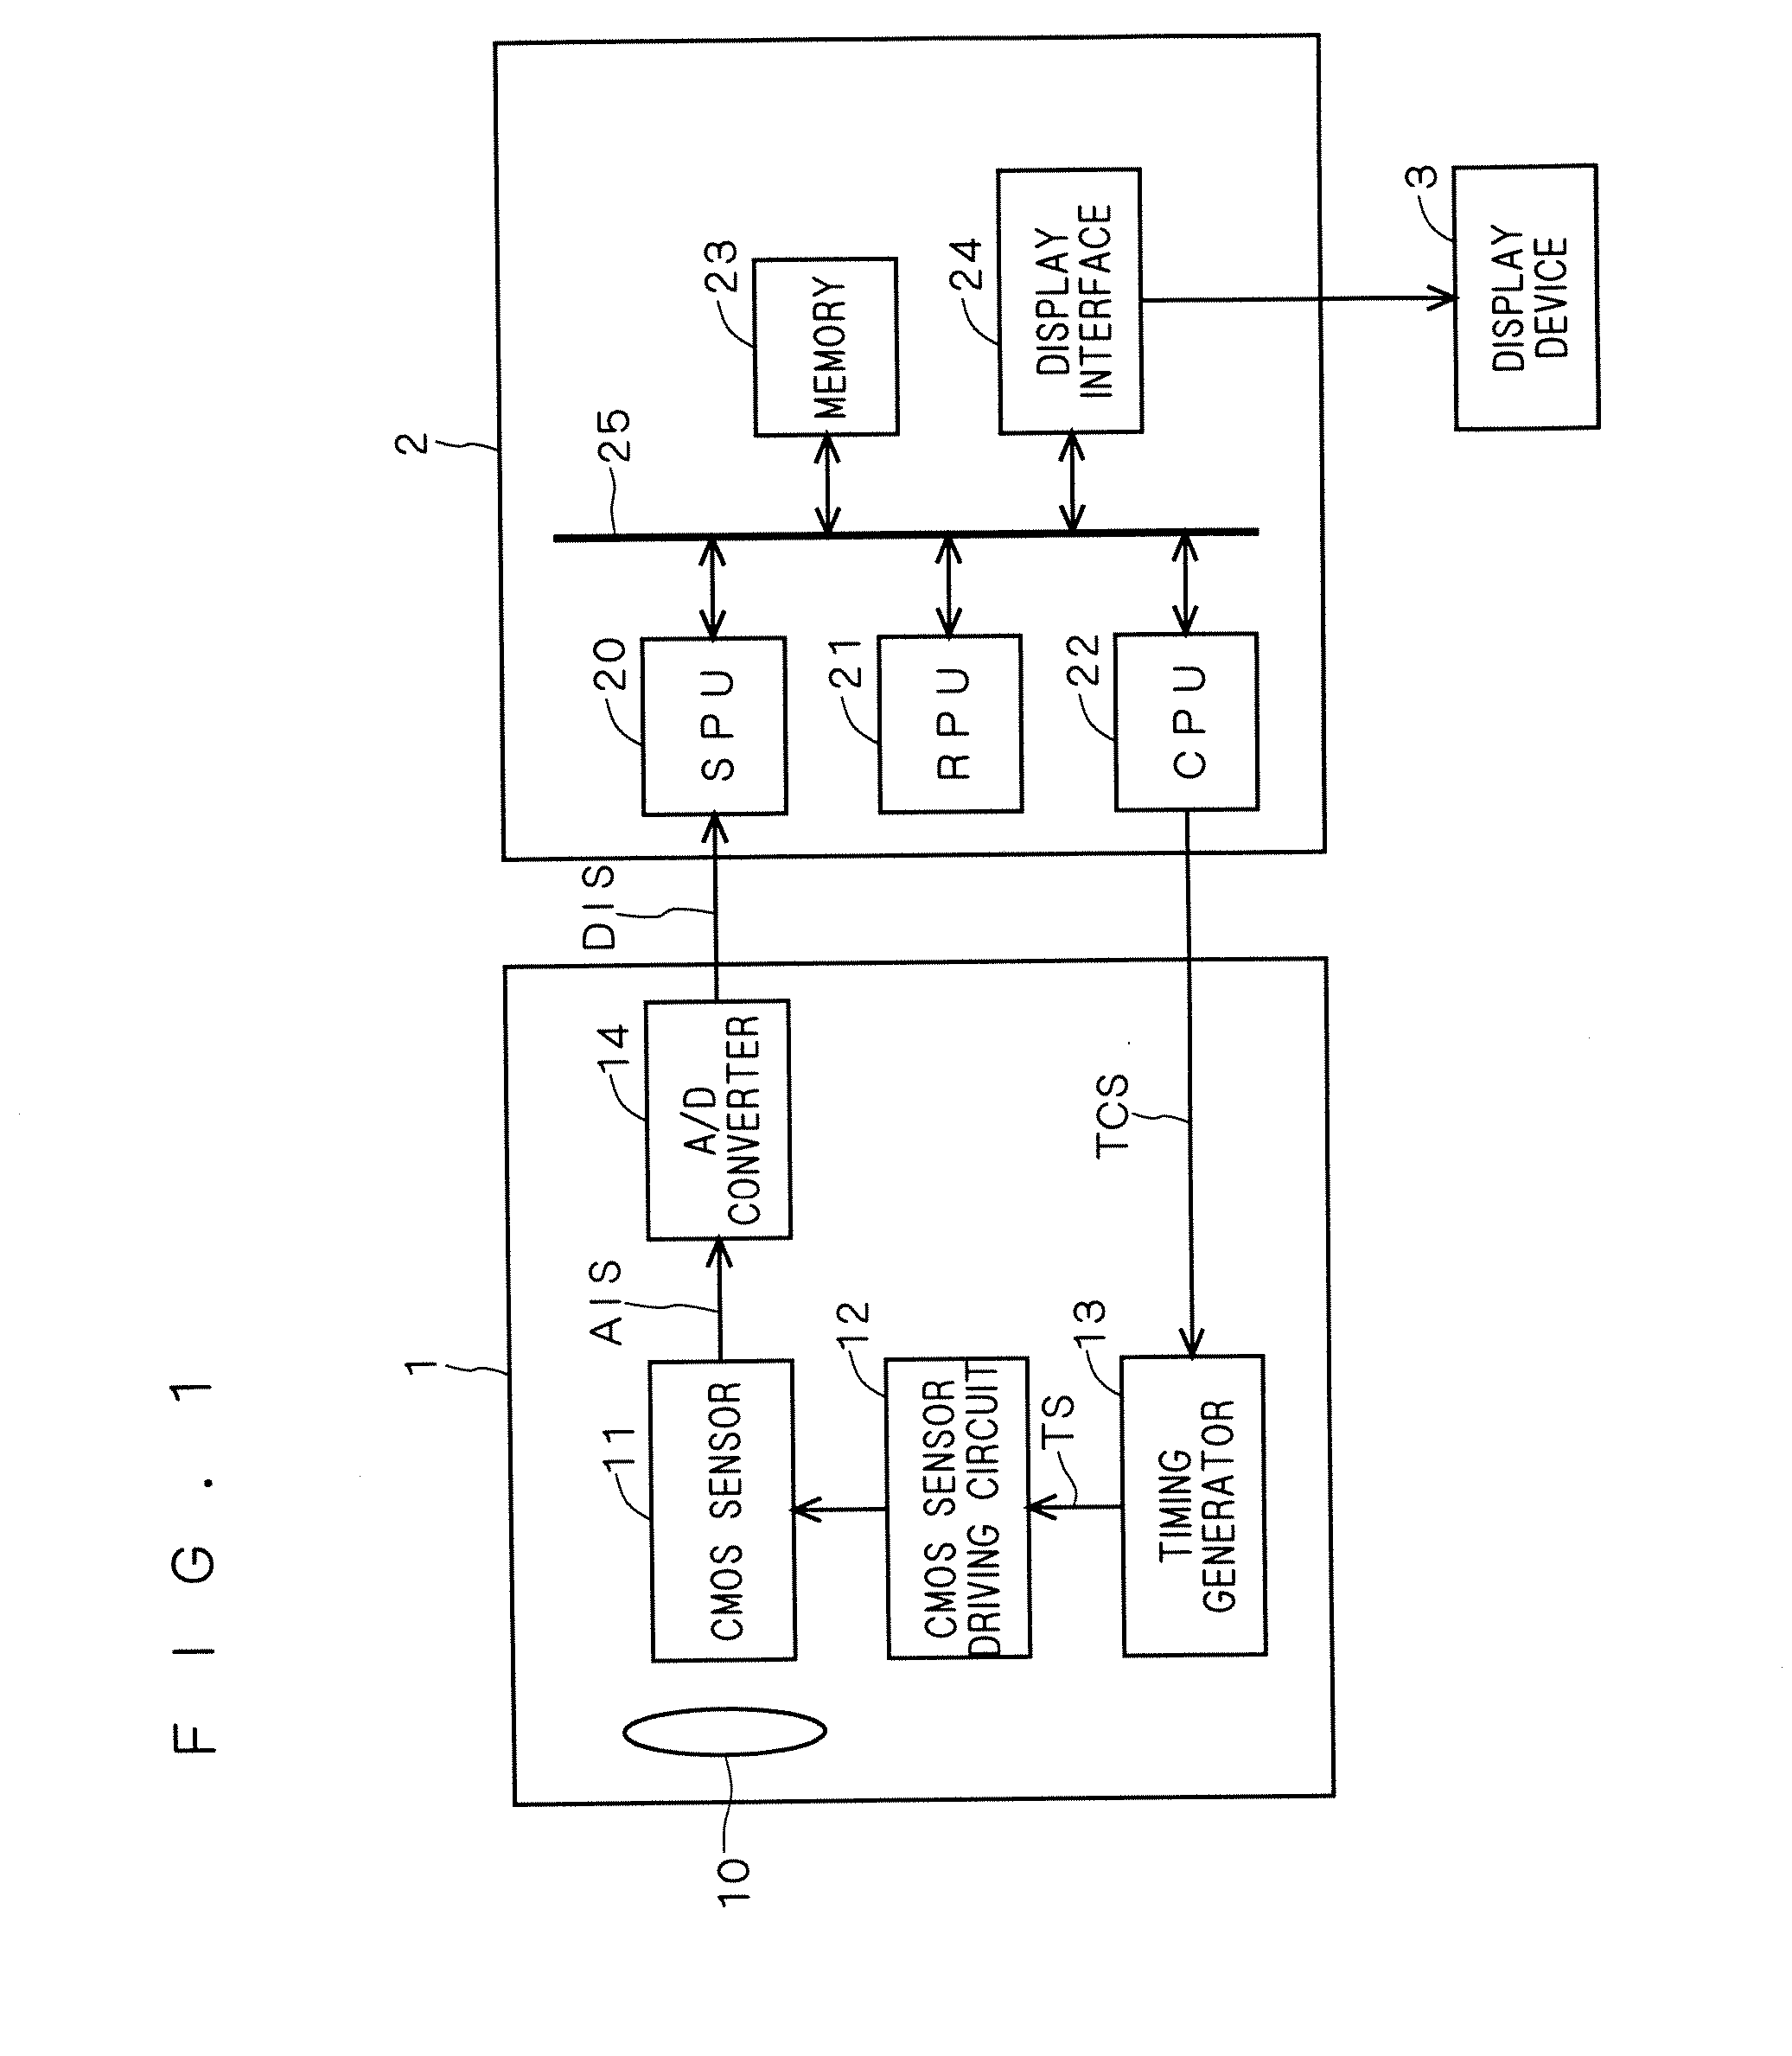 Image processor and camera system, image processing method, and motion picture displaying method